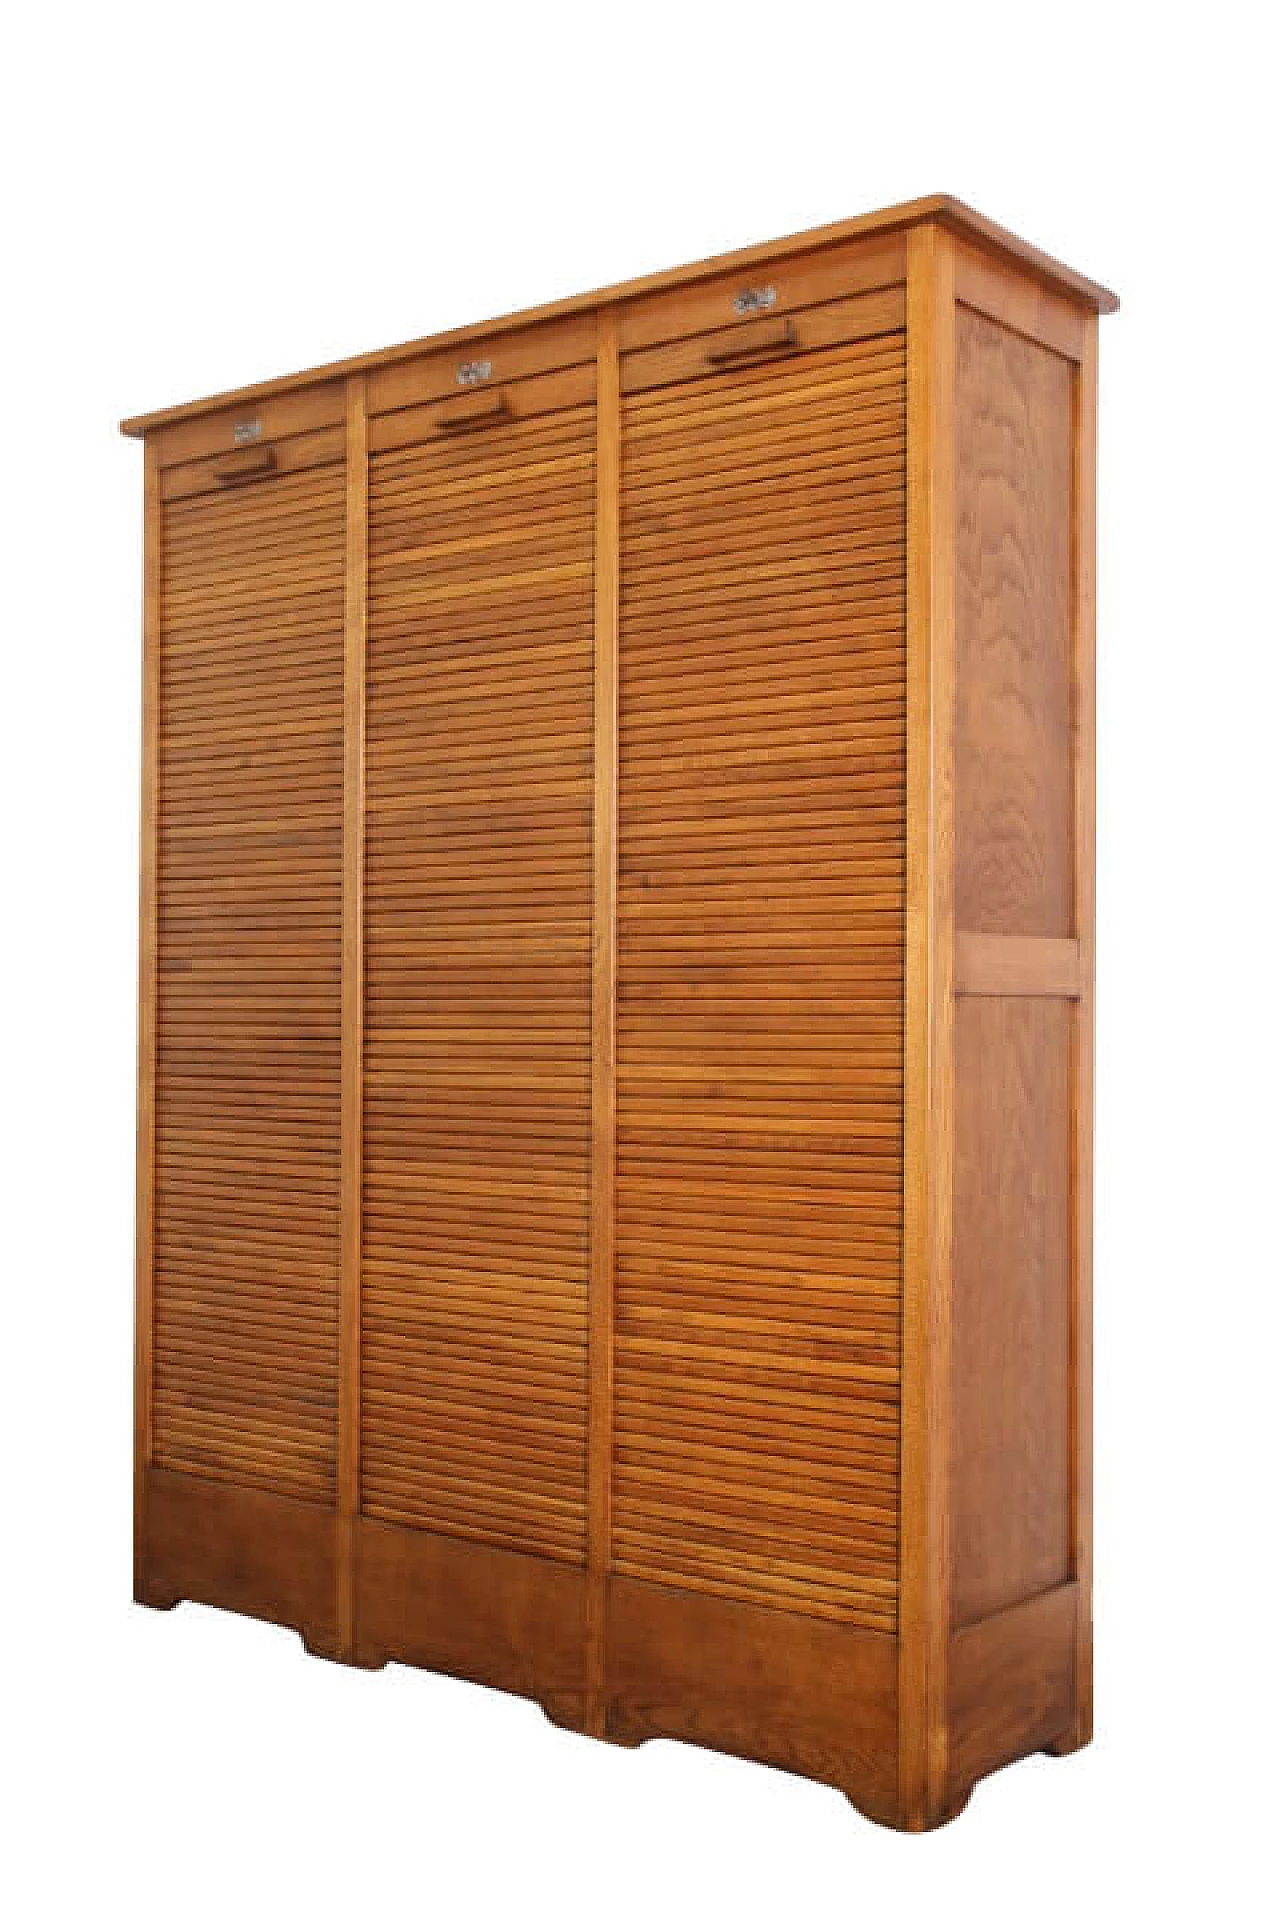 Bookcase or filing cabinet with 3 oak shutters, 1940s 1195191